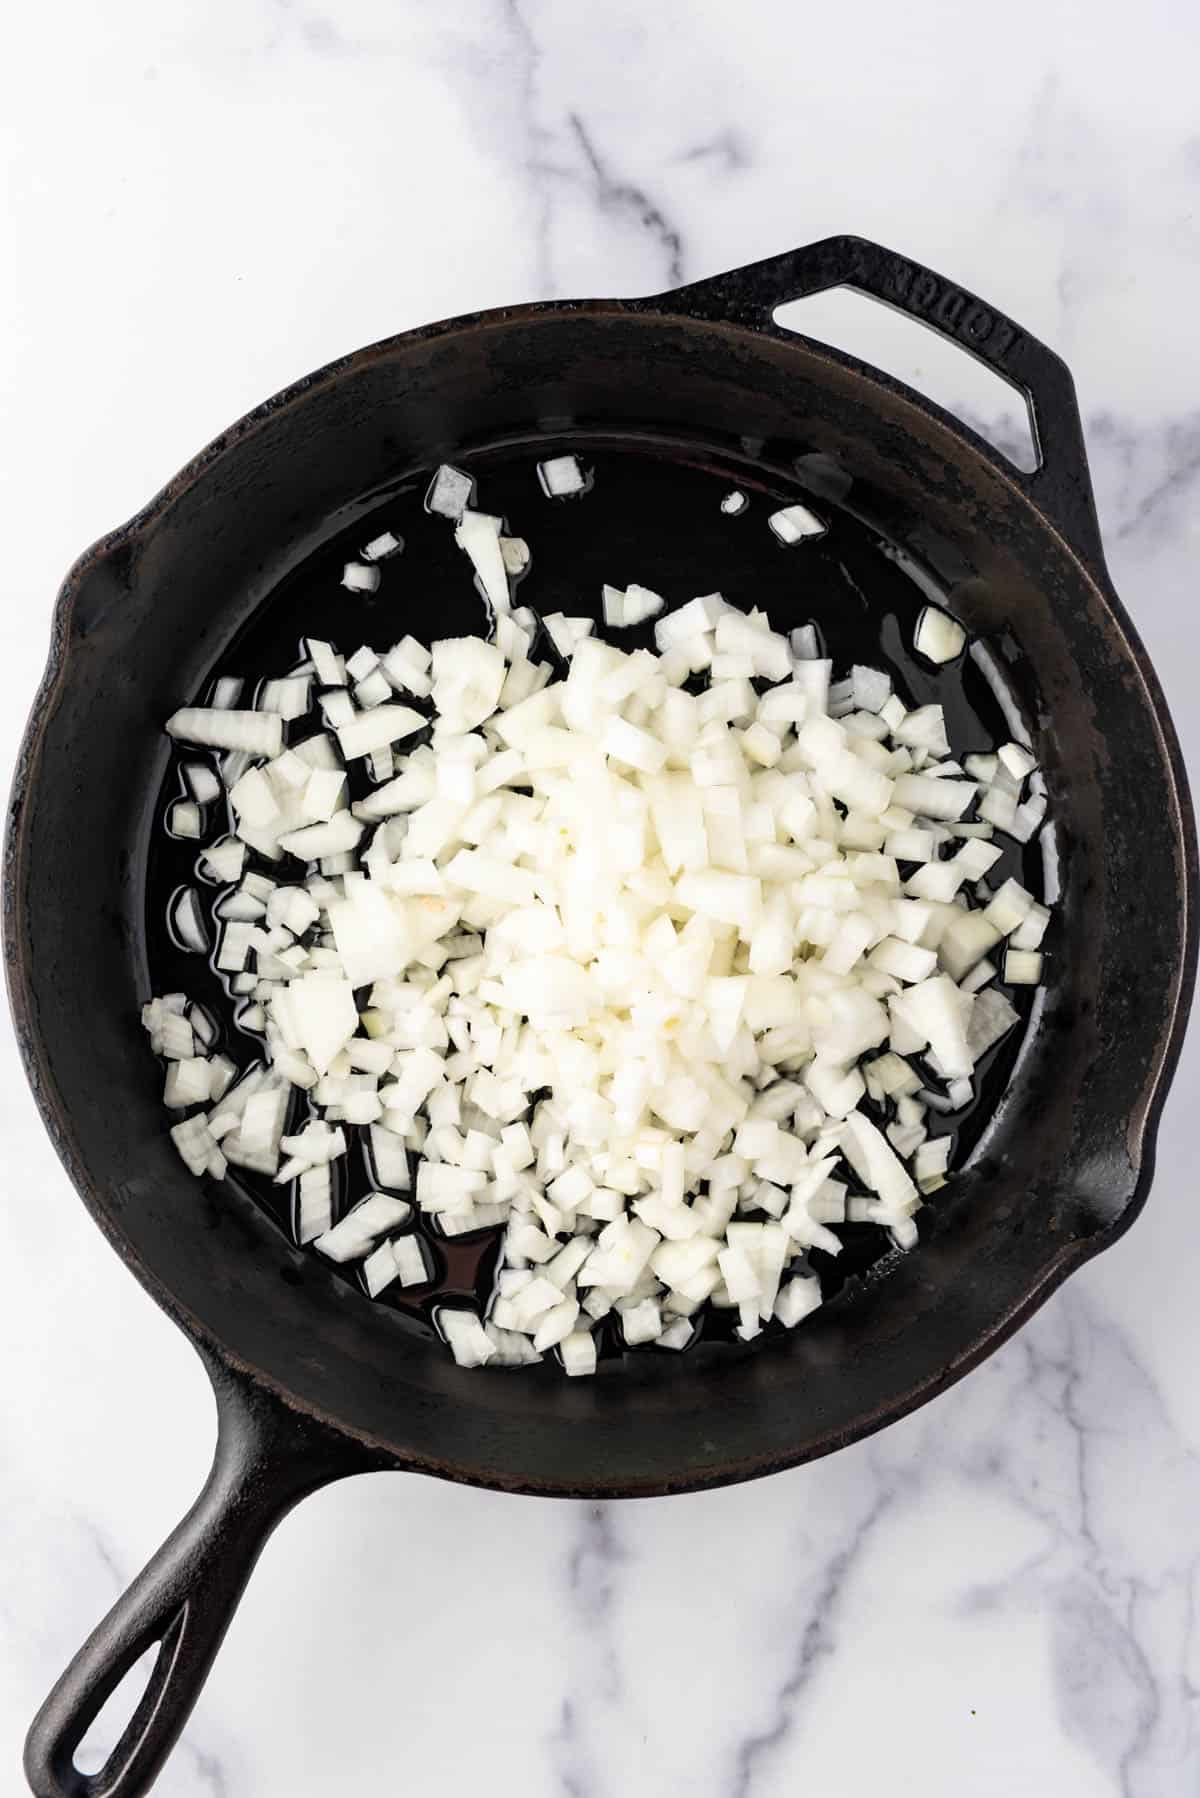 Sauteeing chopped onions in a large cast iron skillet.